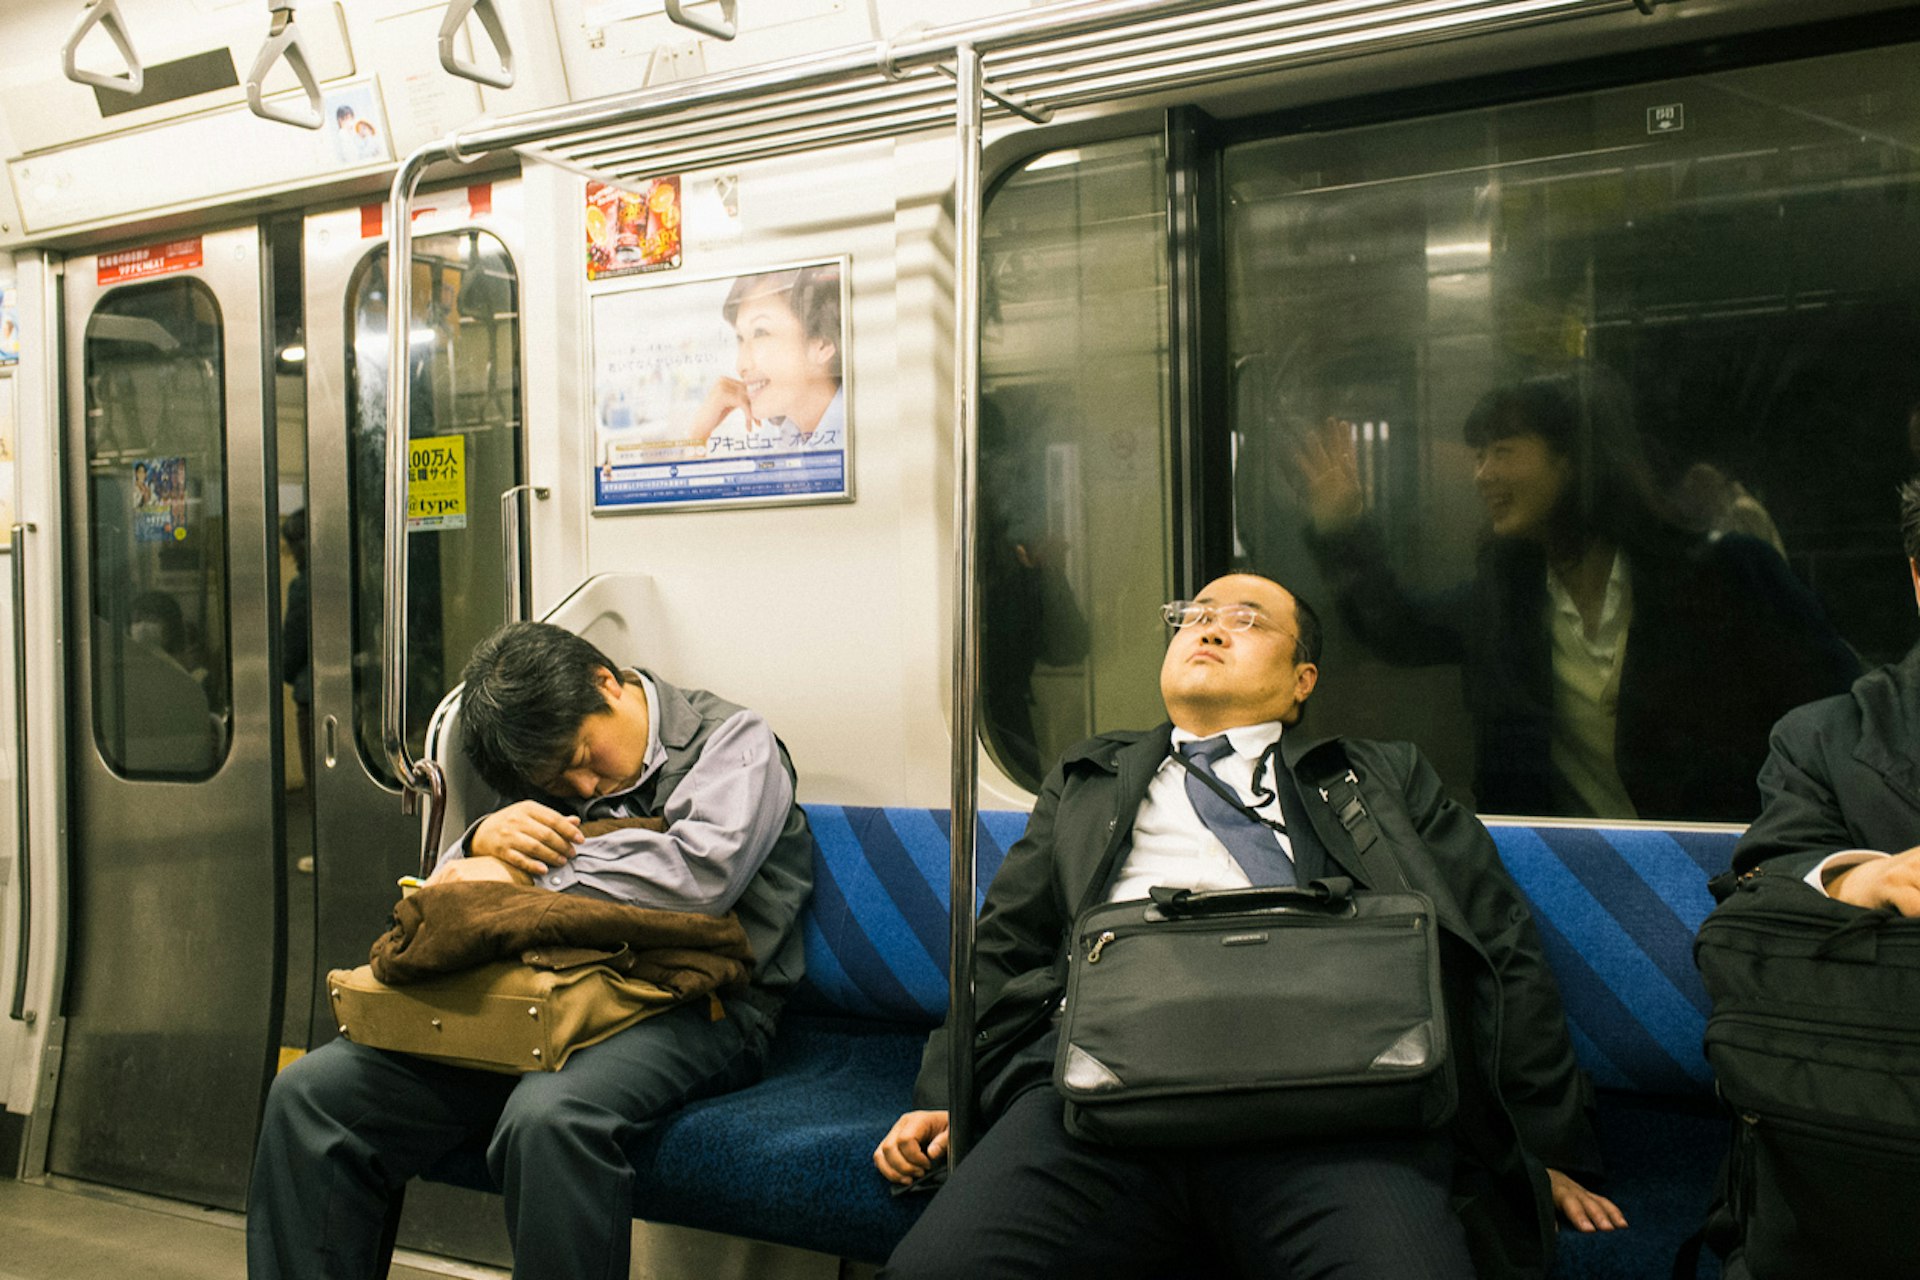 Magic in the mundane: candid shots on the streets of Japan